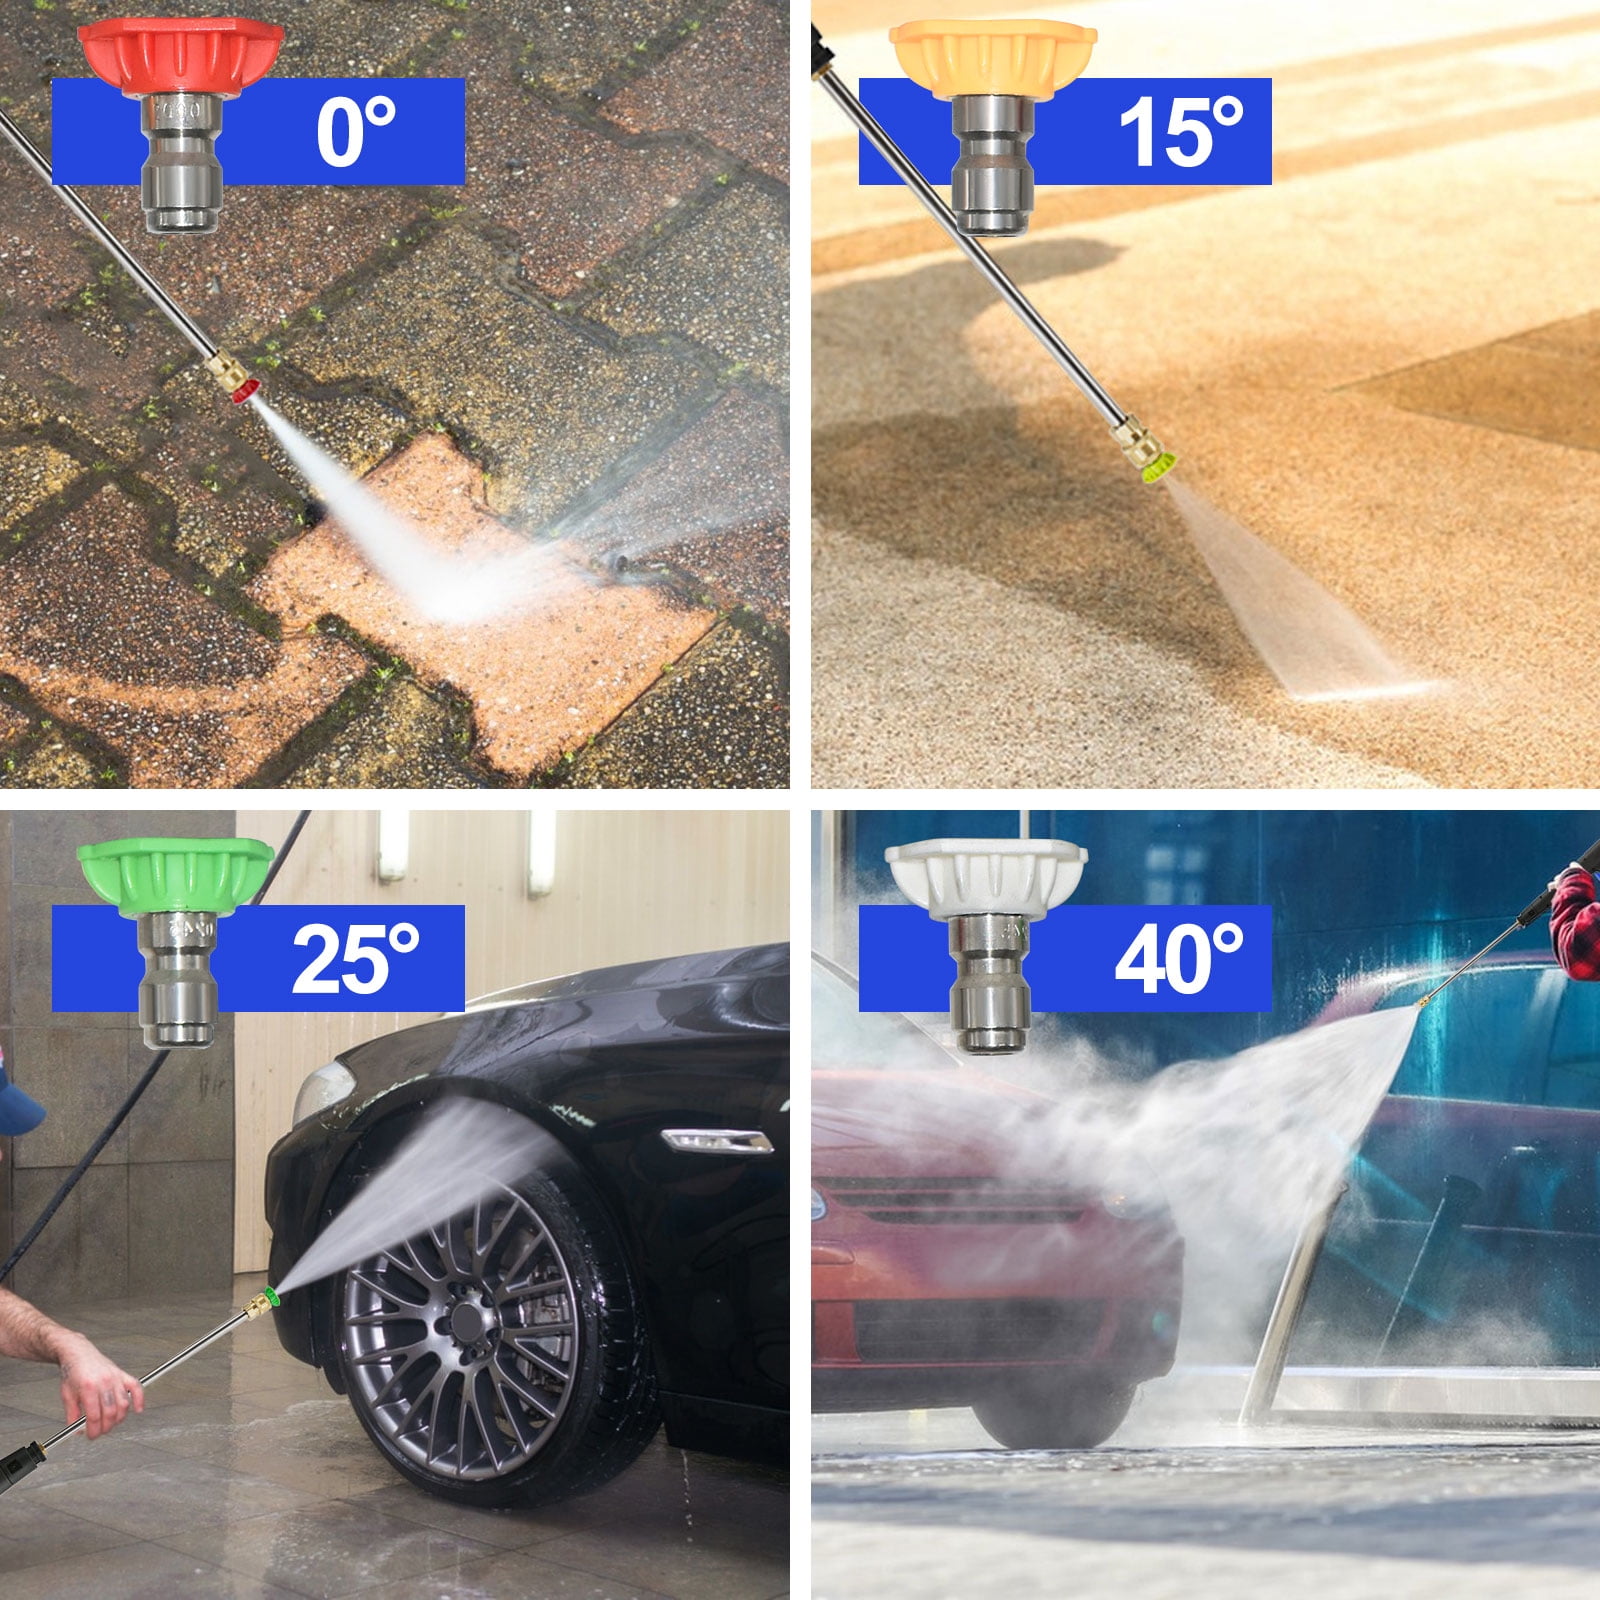 2150PSI Pressure Washer 2.6 GPM Powerful Electric Power Car Washer with  Hose Reel, 4 Nozzles Foam Cannon, Soap Tank. Cannon for Cars, Homes